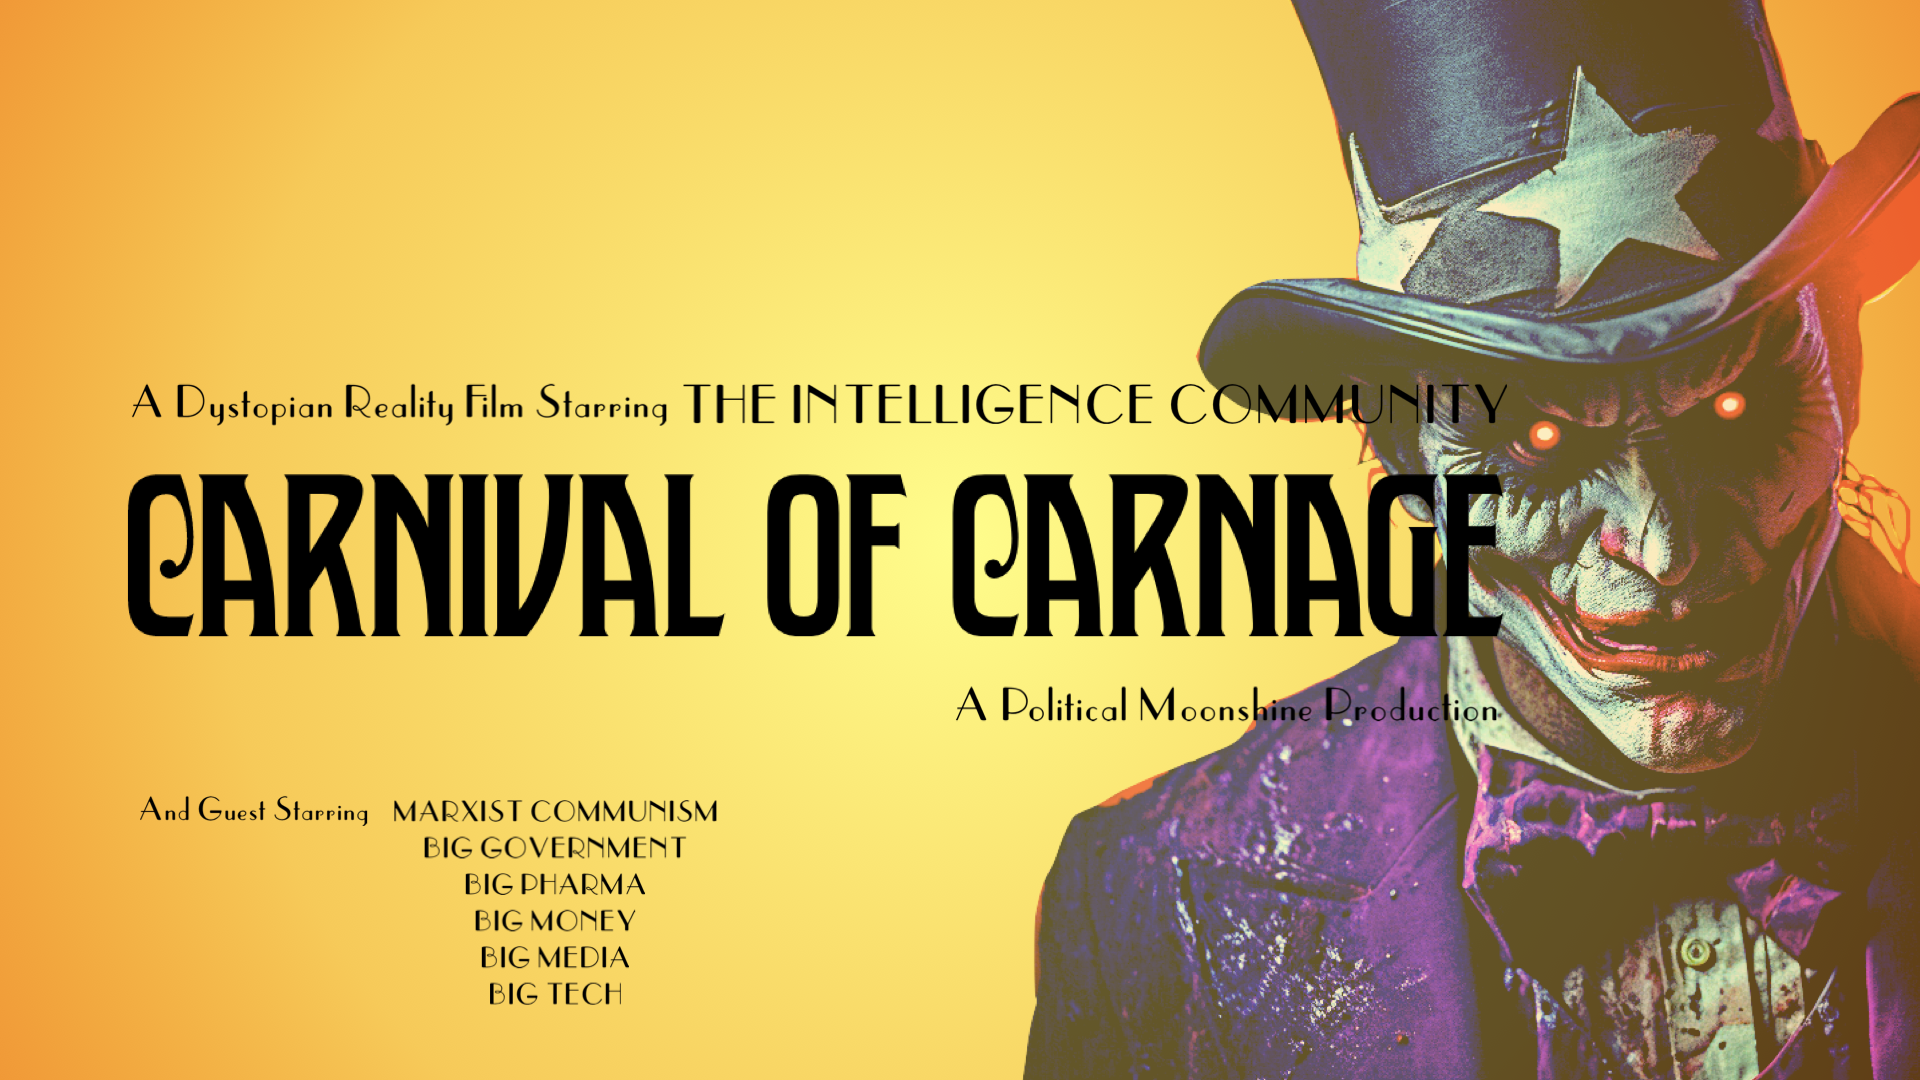 VIDEO: Carnival of Carnage